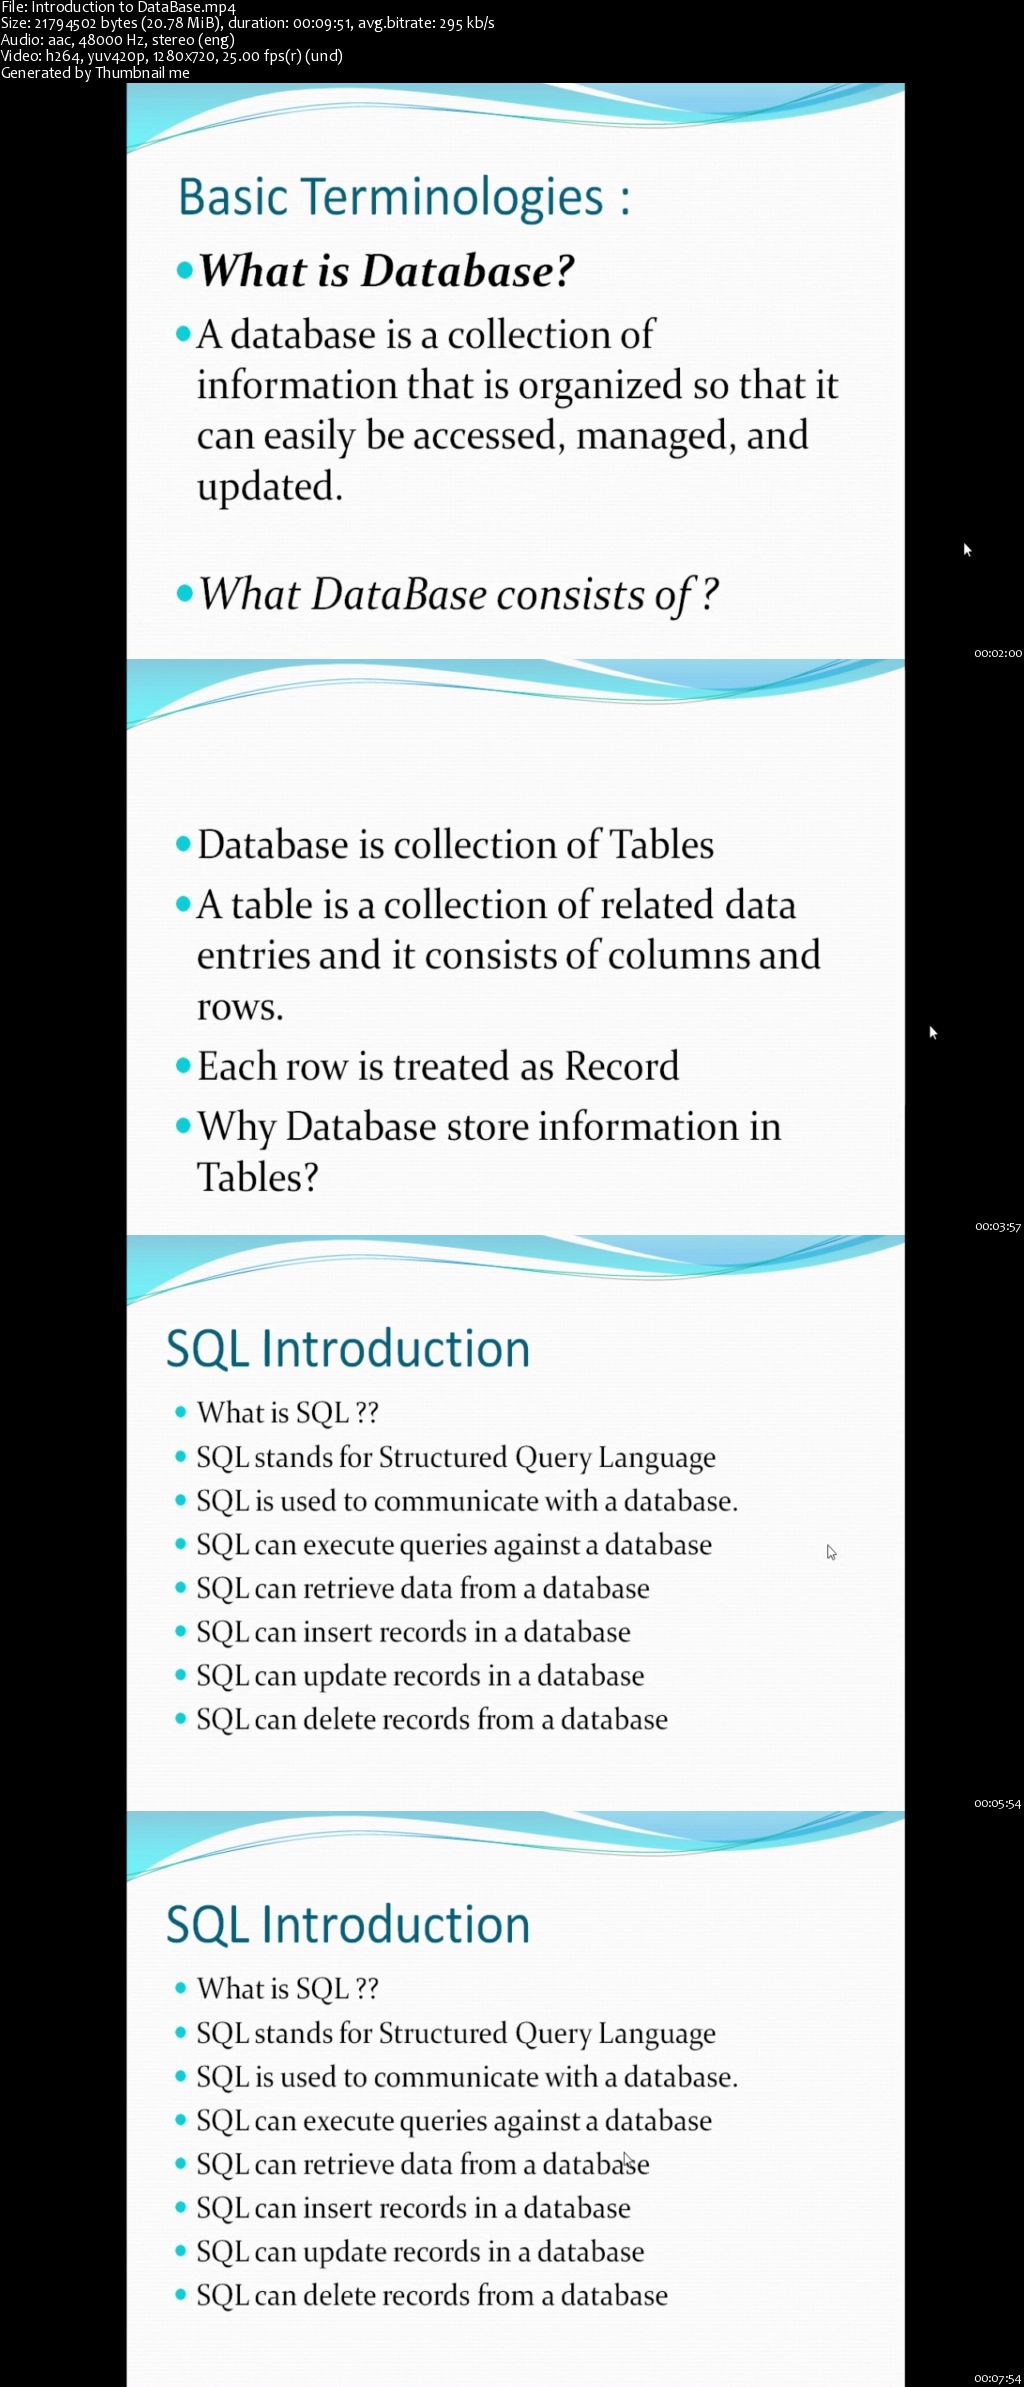 Learn SQL and Security(pen) testing from Scratch